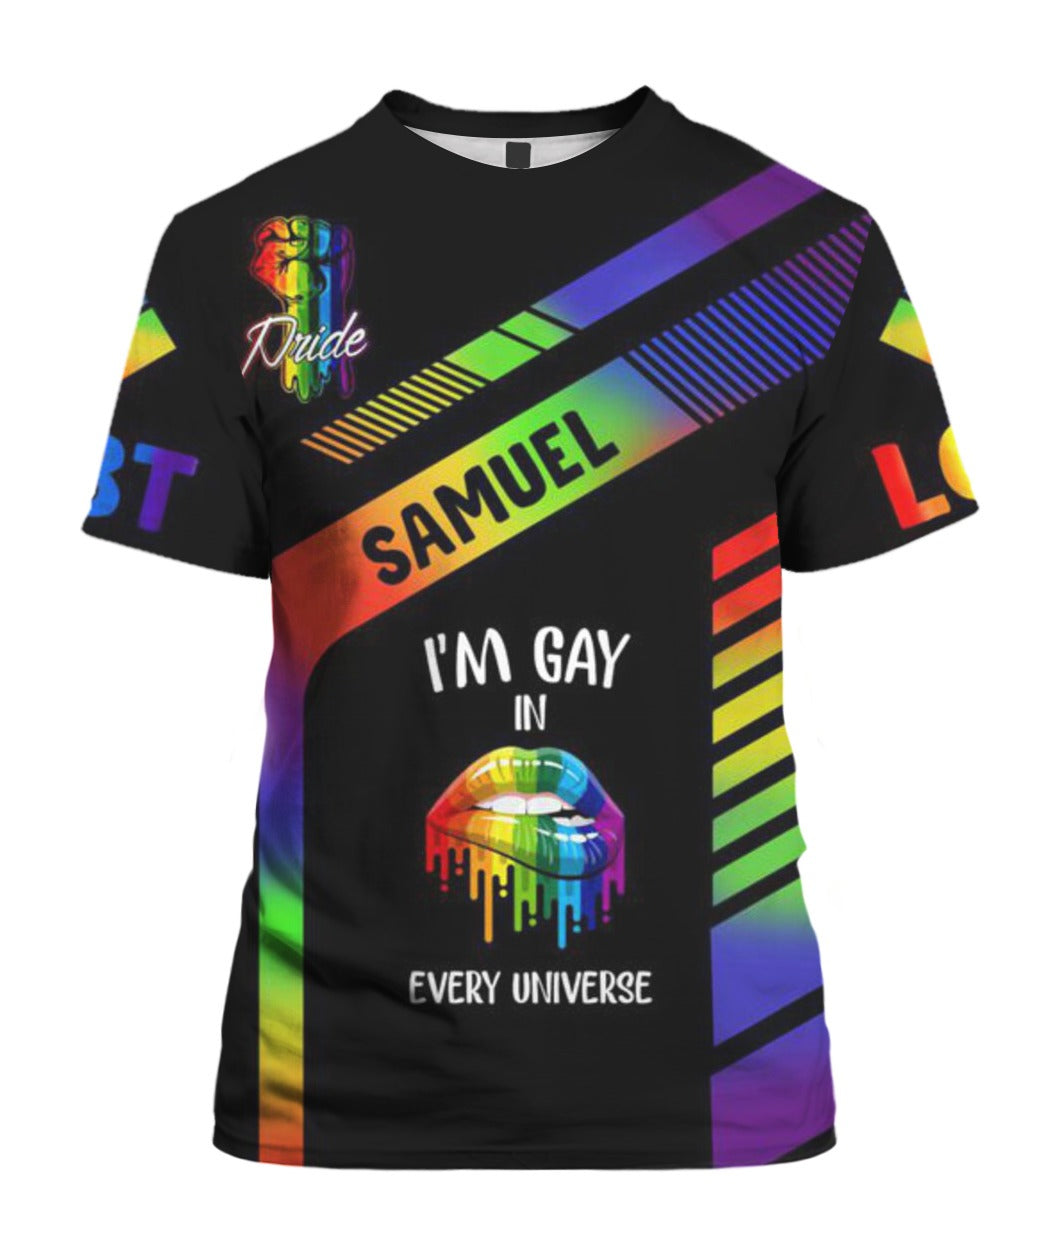 Personalized Rainbow Striped 3D Tee Shirt/ Full Print Shirt For Pride/ Don